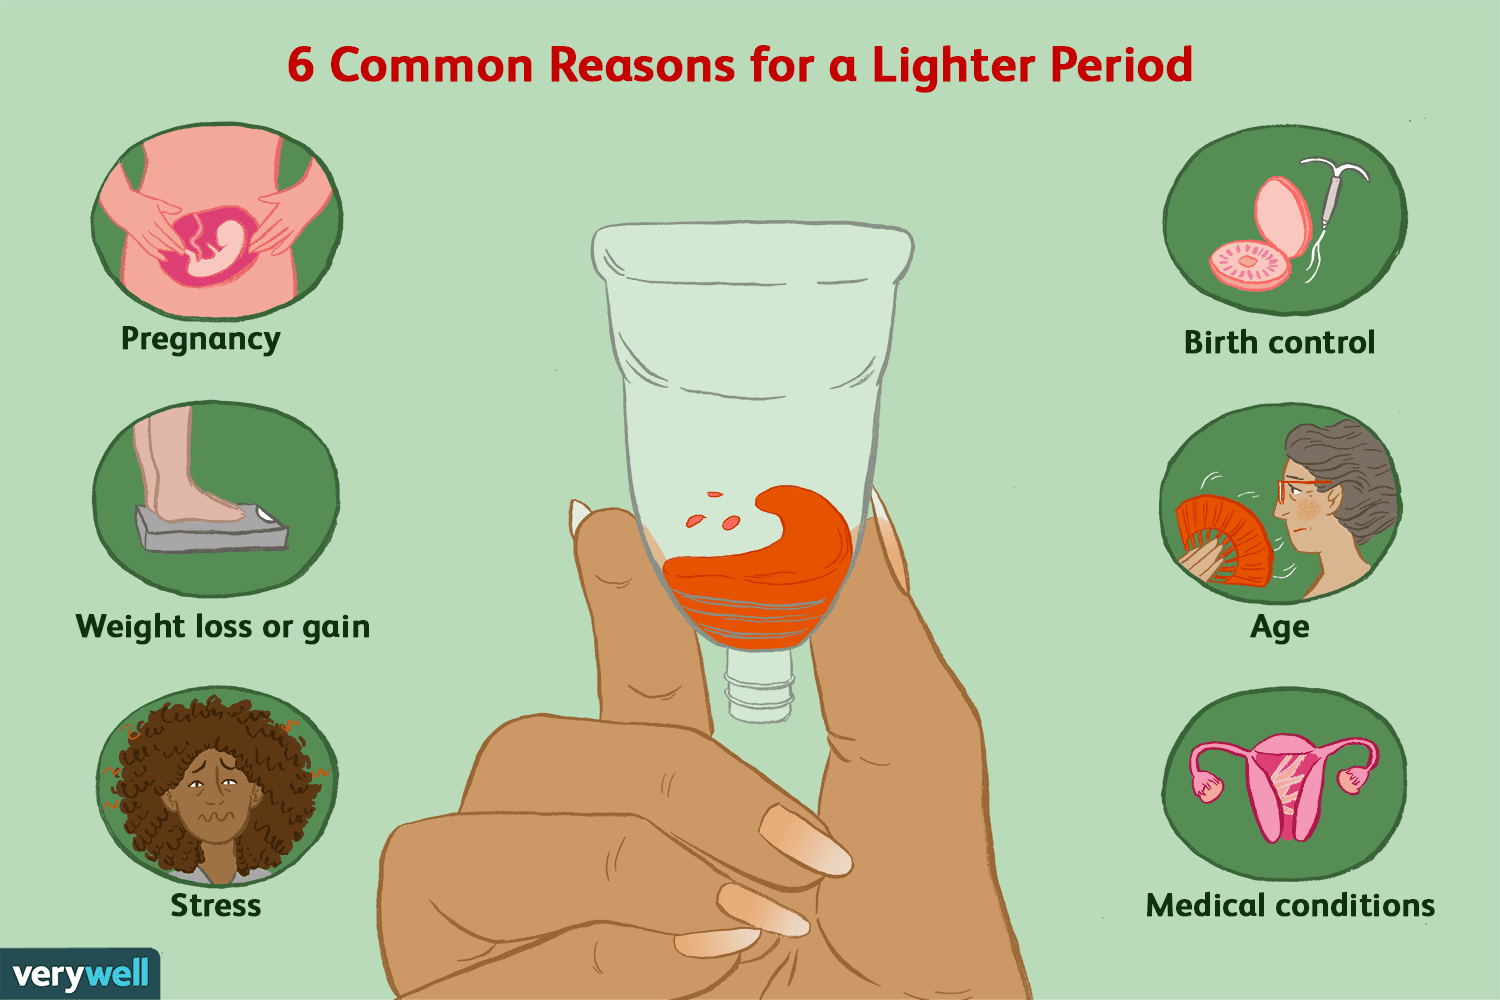 6 Common Reasons for Lighter Periods Than Normal